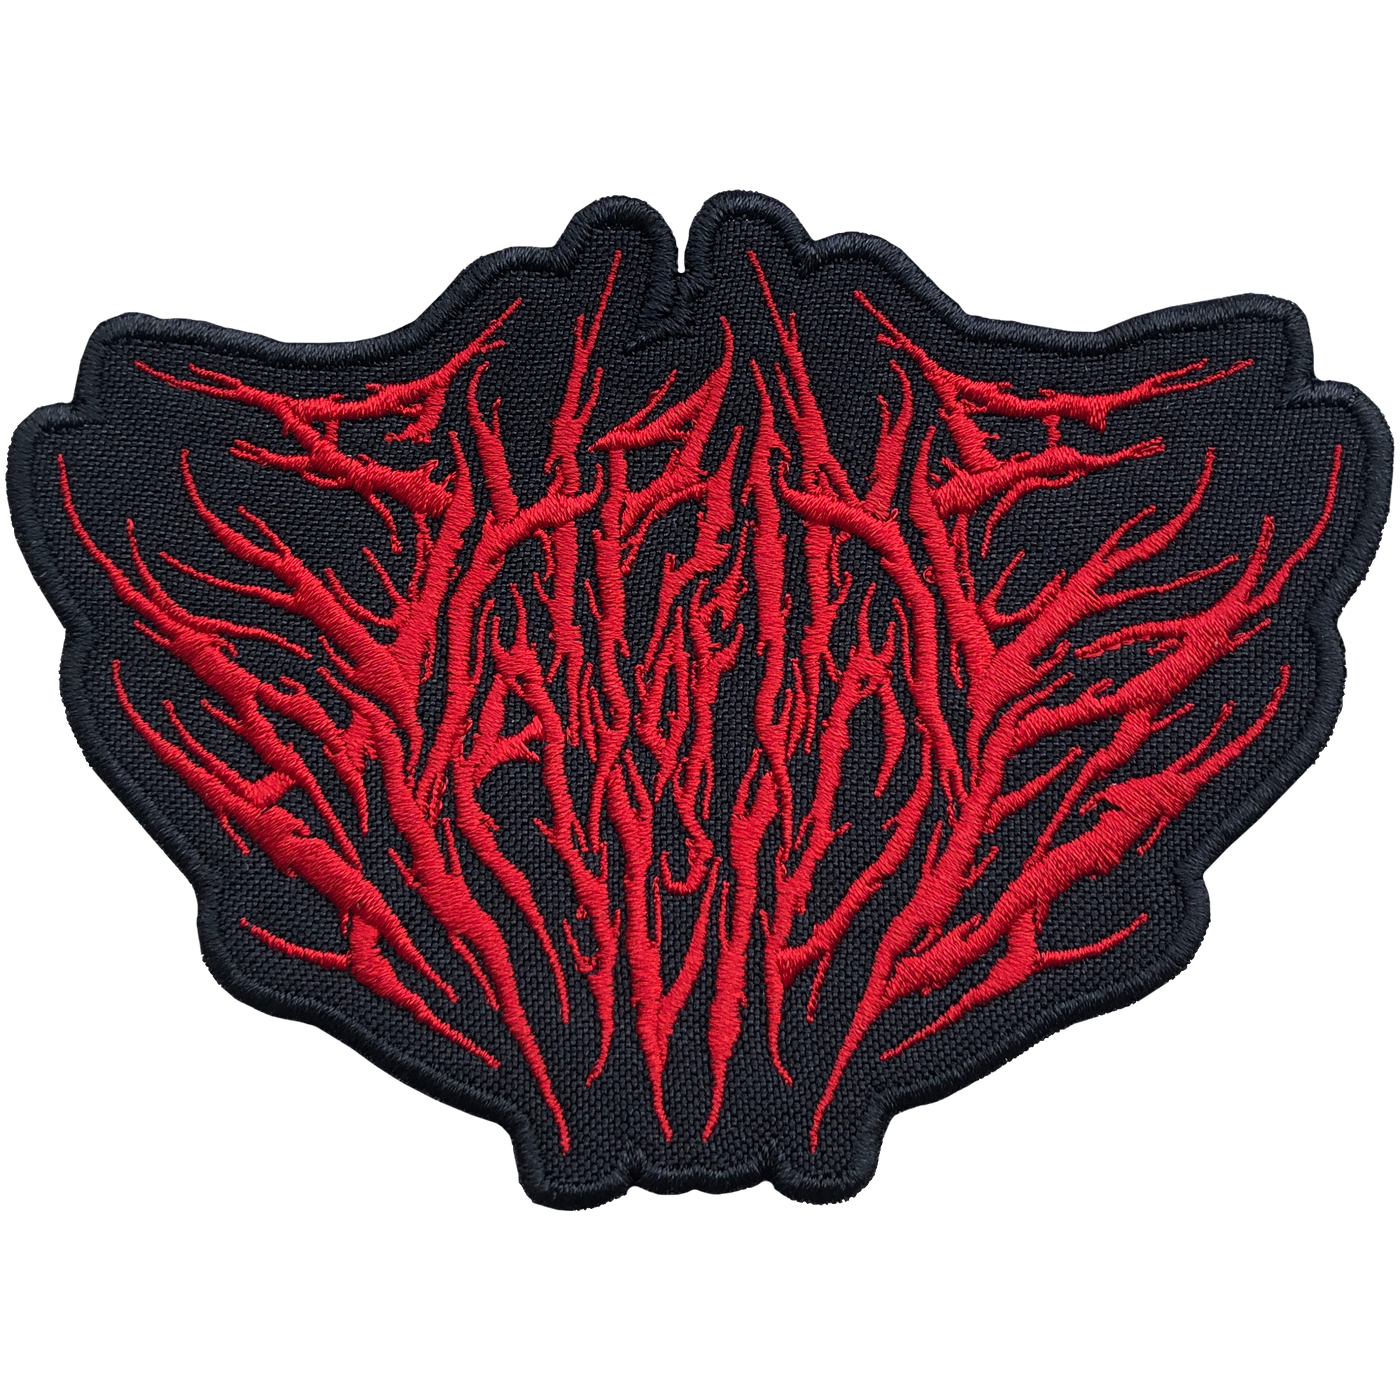 Shrine Of Malice Patches